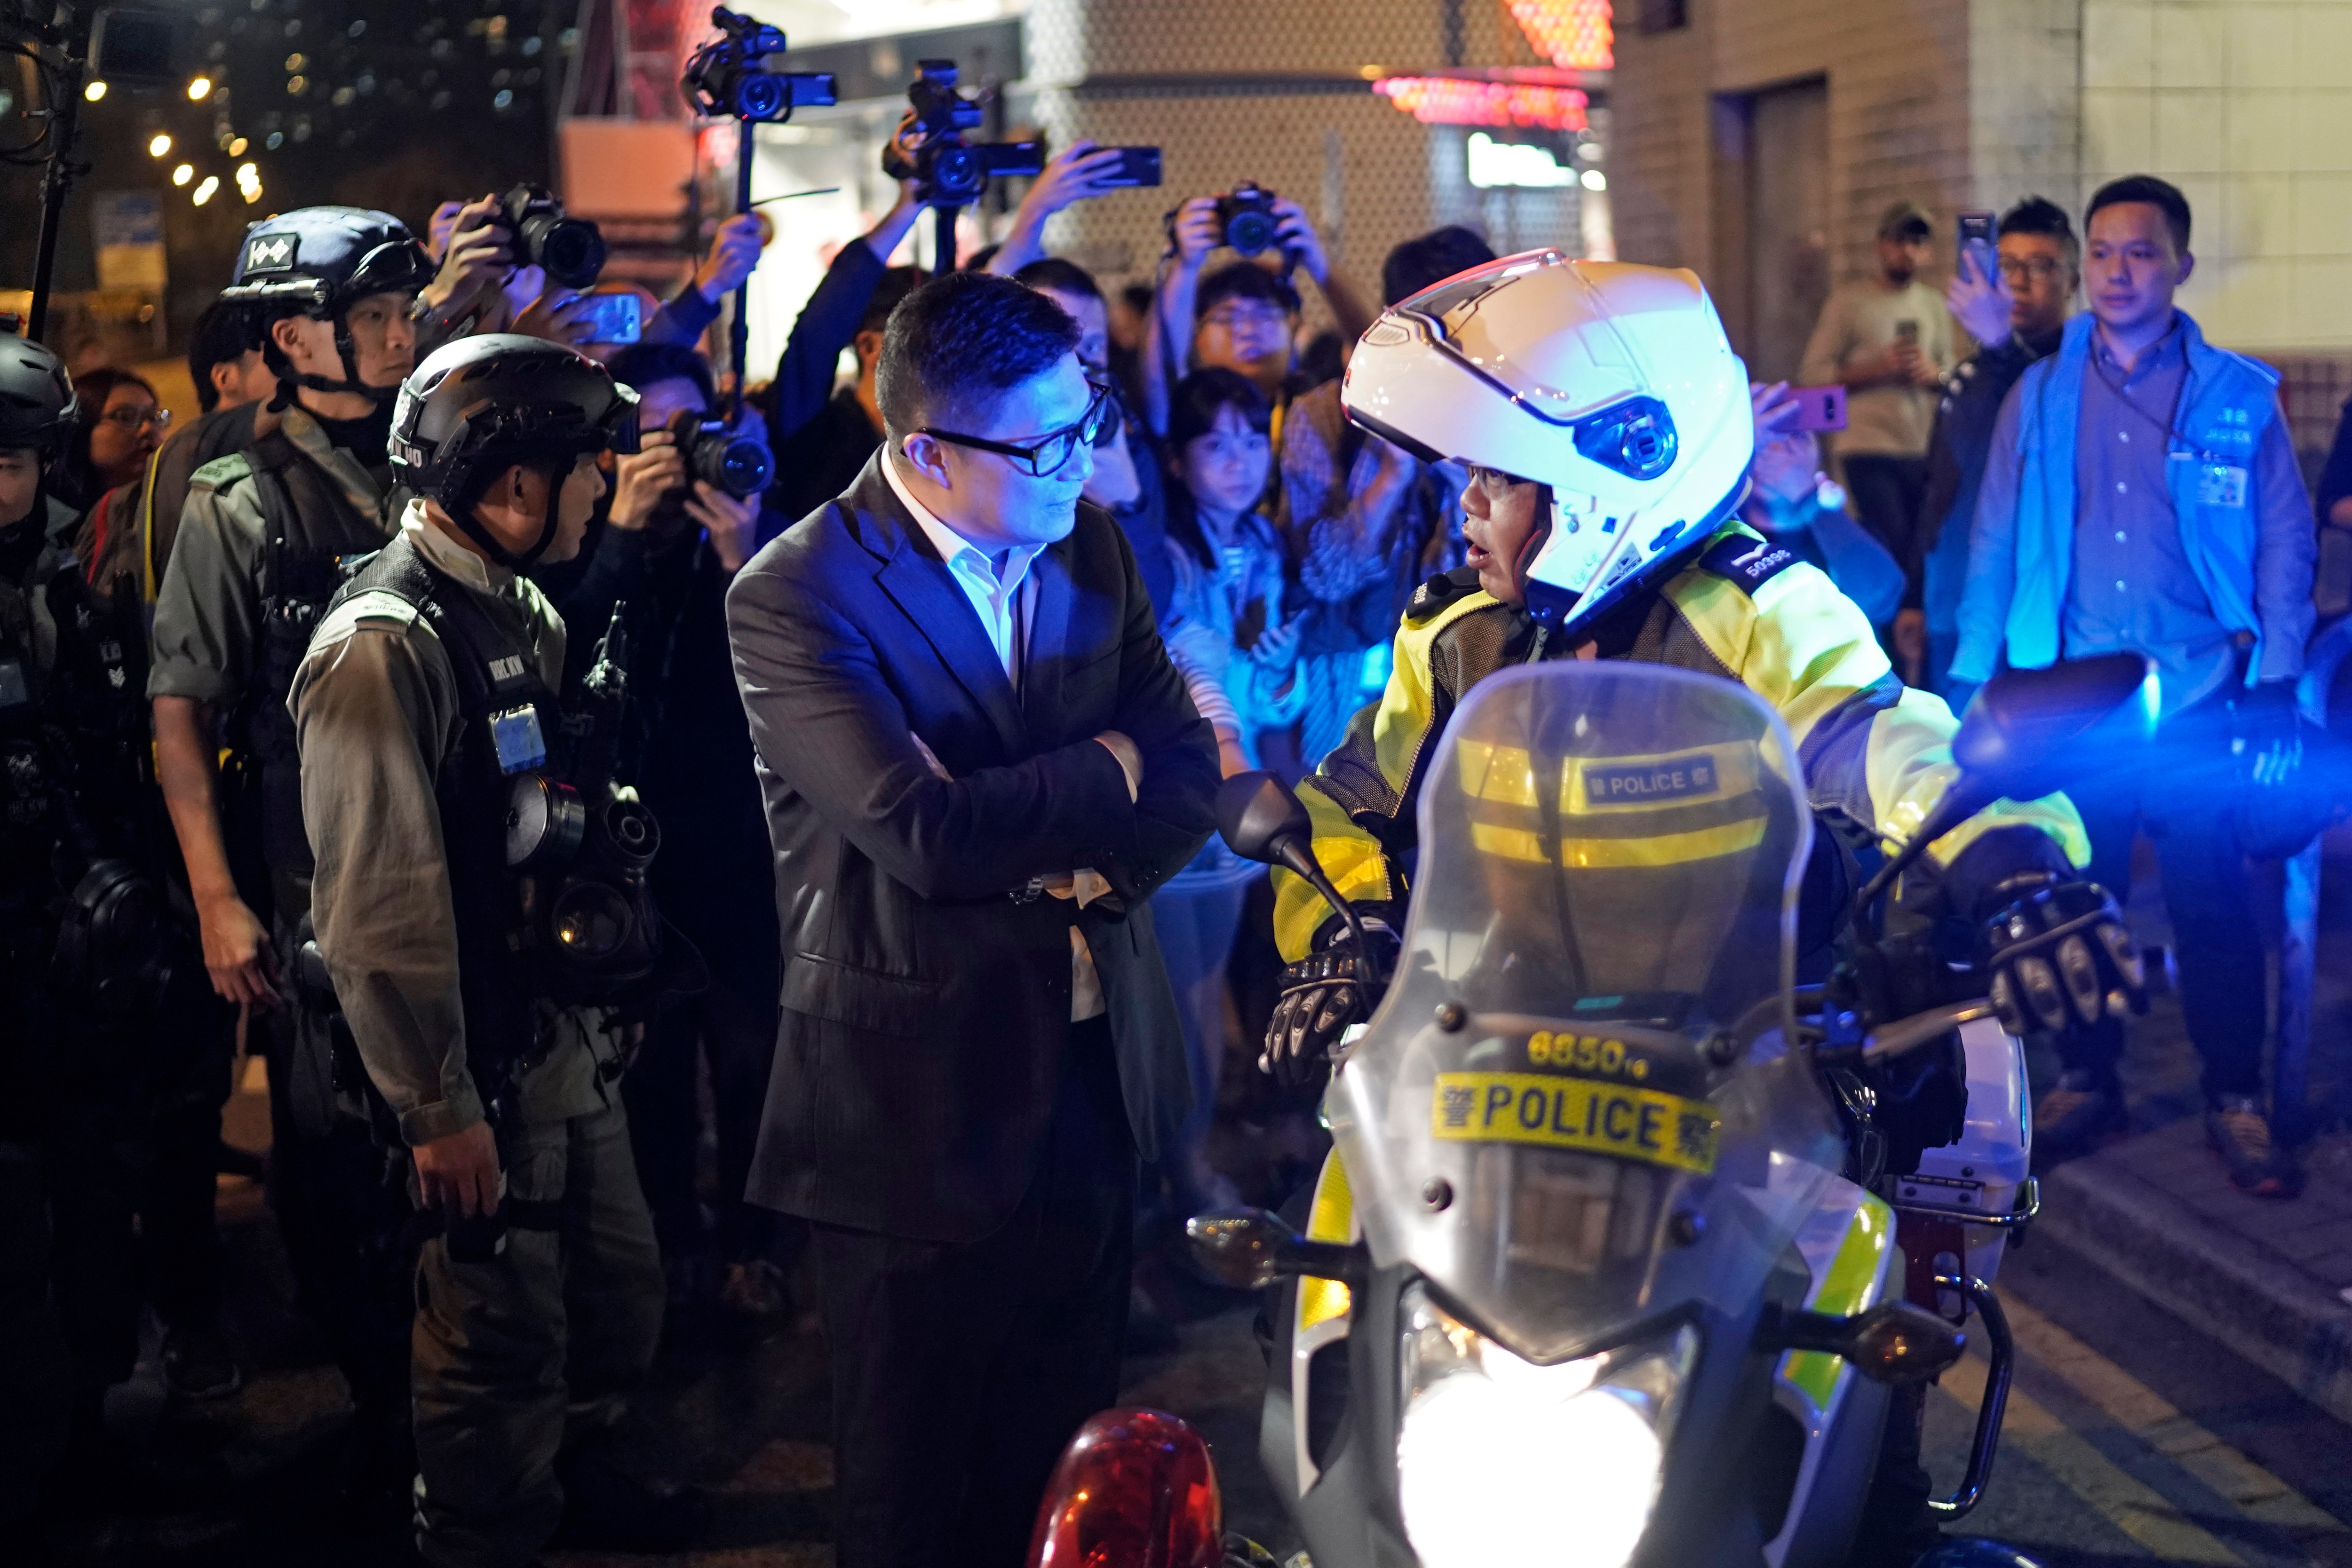 Police Commissioner Chris Tang Ping-keung, center, speaks to a police officer on duty during Christmas Eve in Hong Kong.